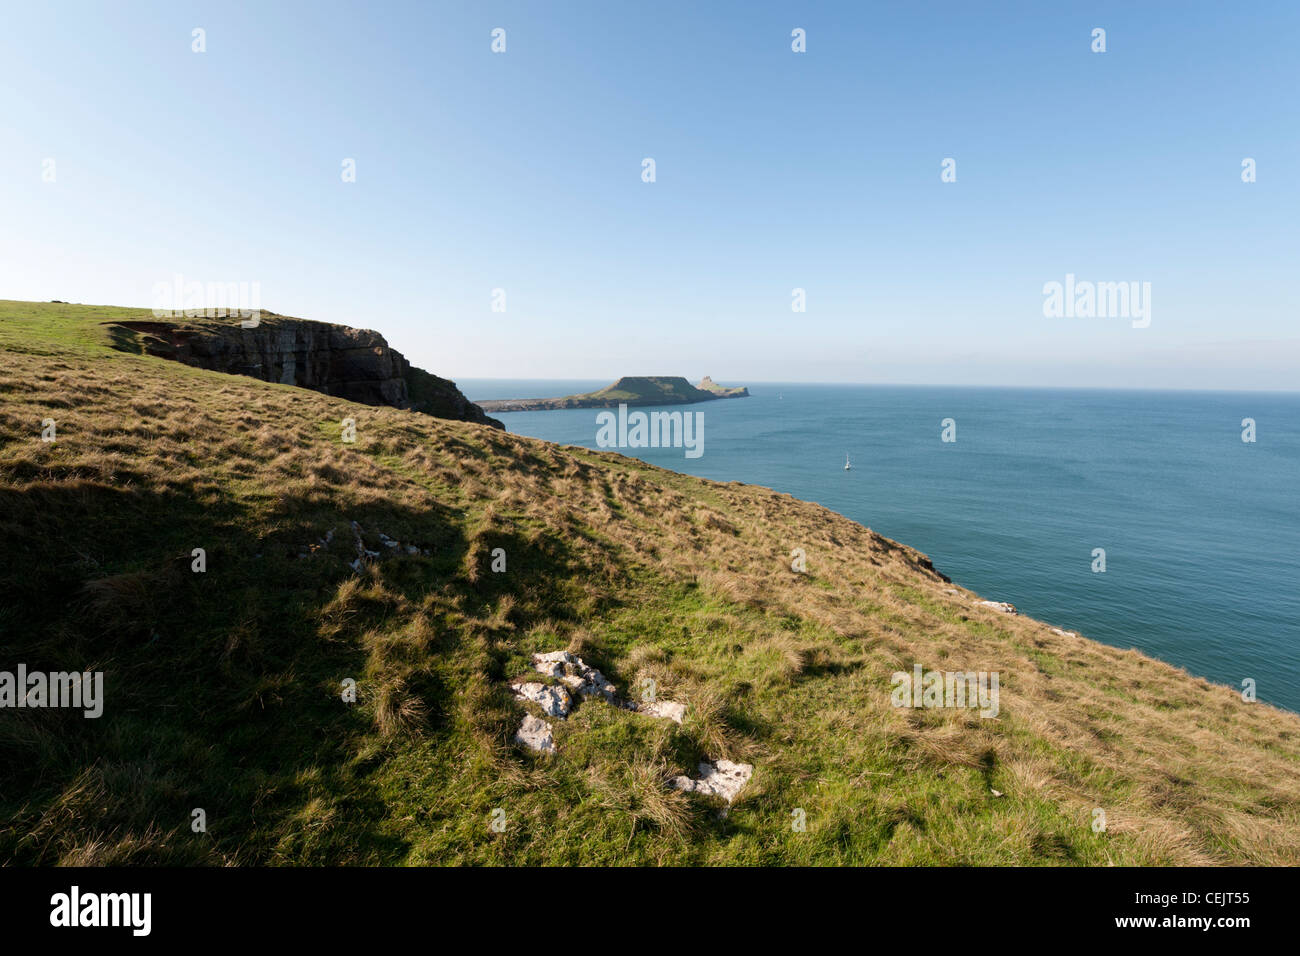 A view towards worms head, Rhossili Bay, Gower Peninsula, South Wales Stock Photo